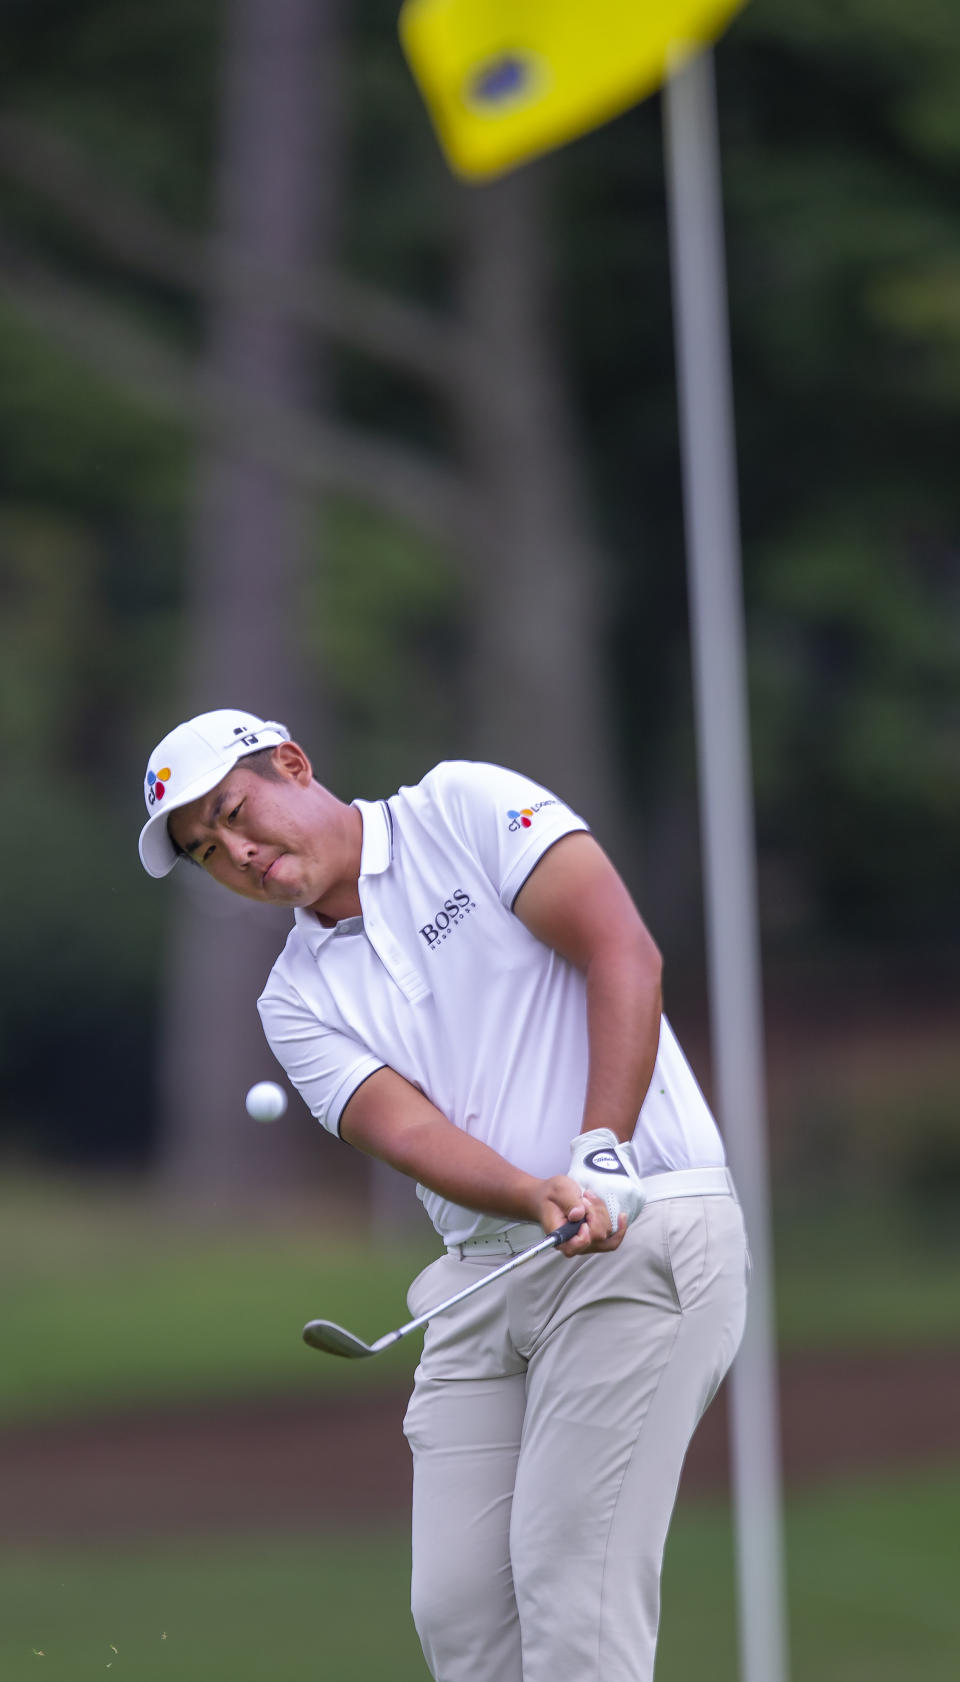 Byeong Hun An chips onto the ninth green during the second round of the Wyndham Championship golf tournament at Sedgefield Country Club in Greensboro, N.C., Friday, Aug. 2, 2019. (H. Scott Hoffmann/News & Record via AP)